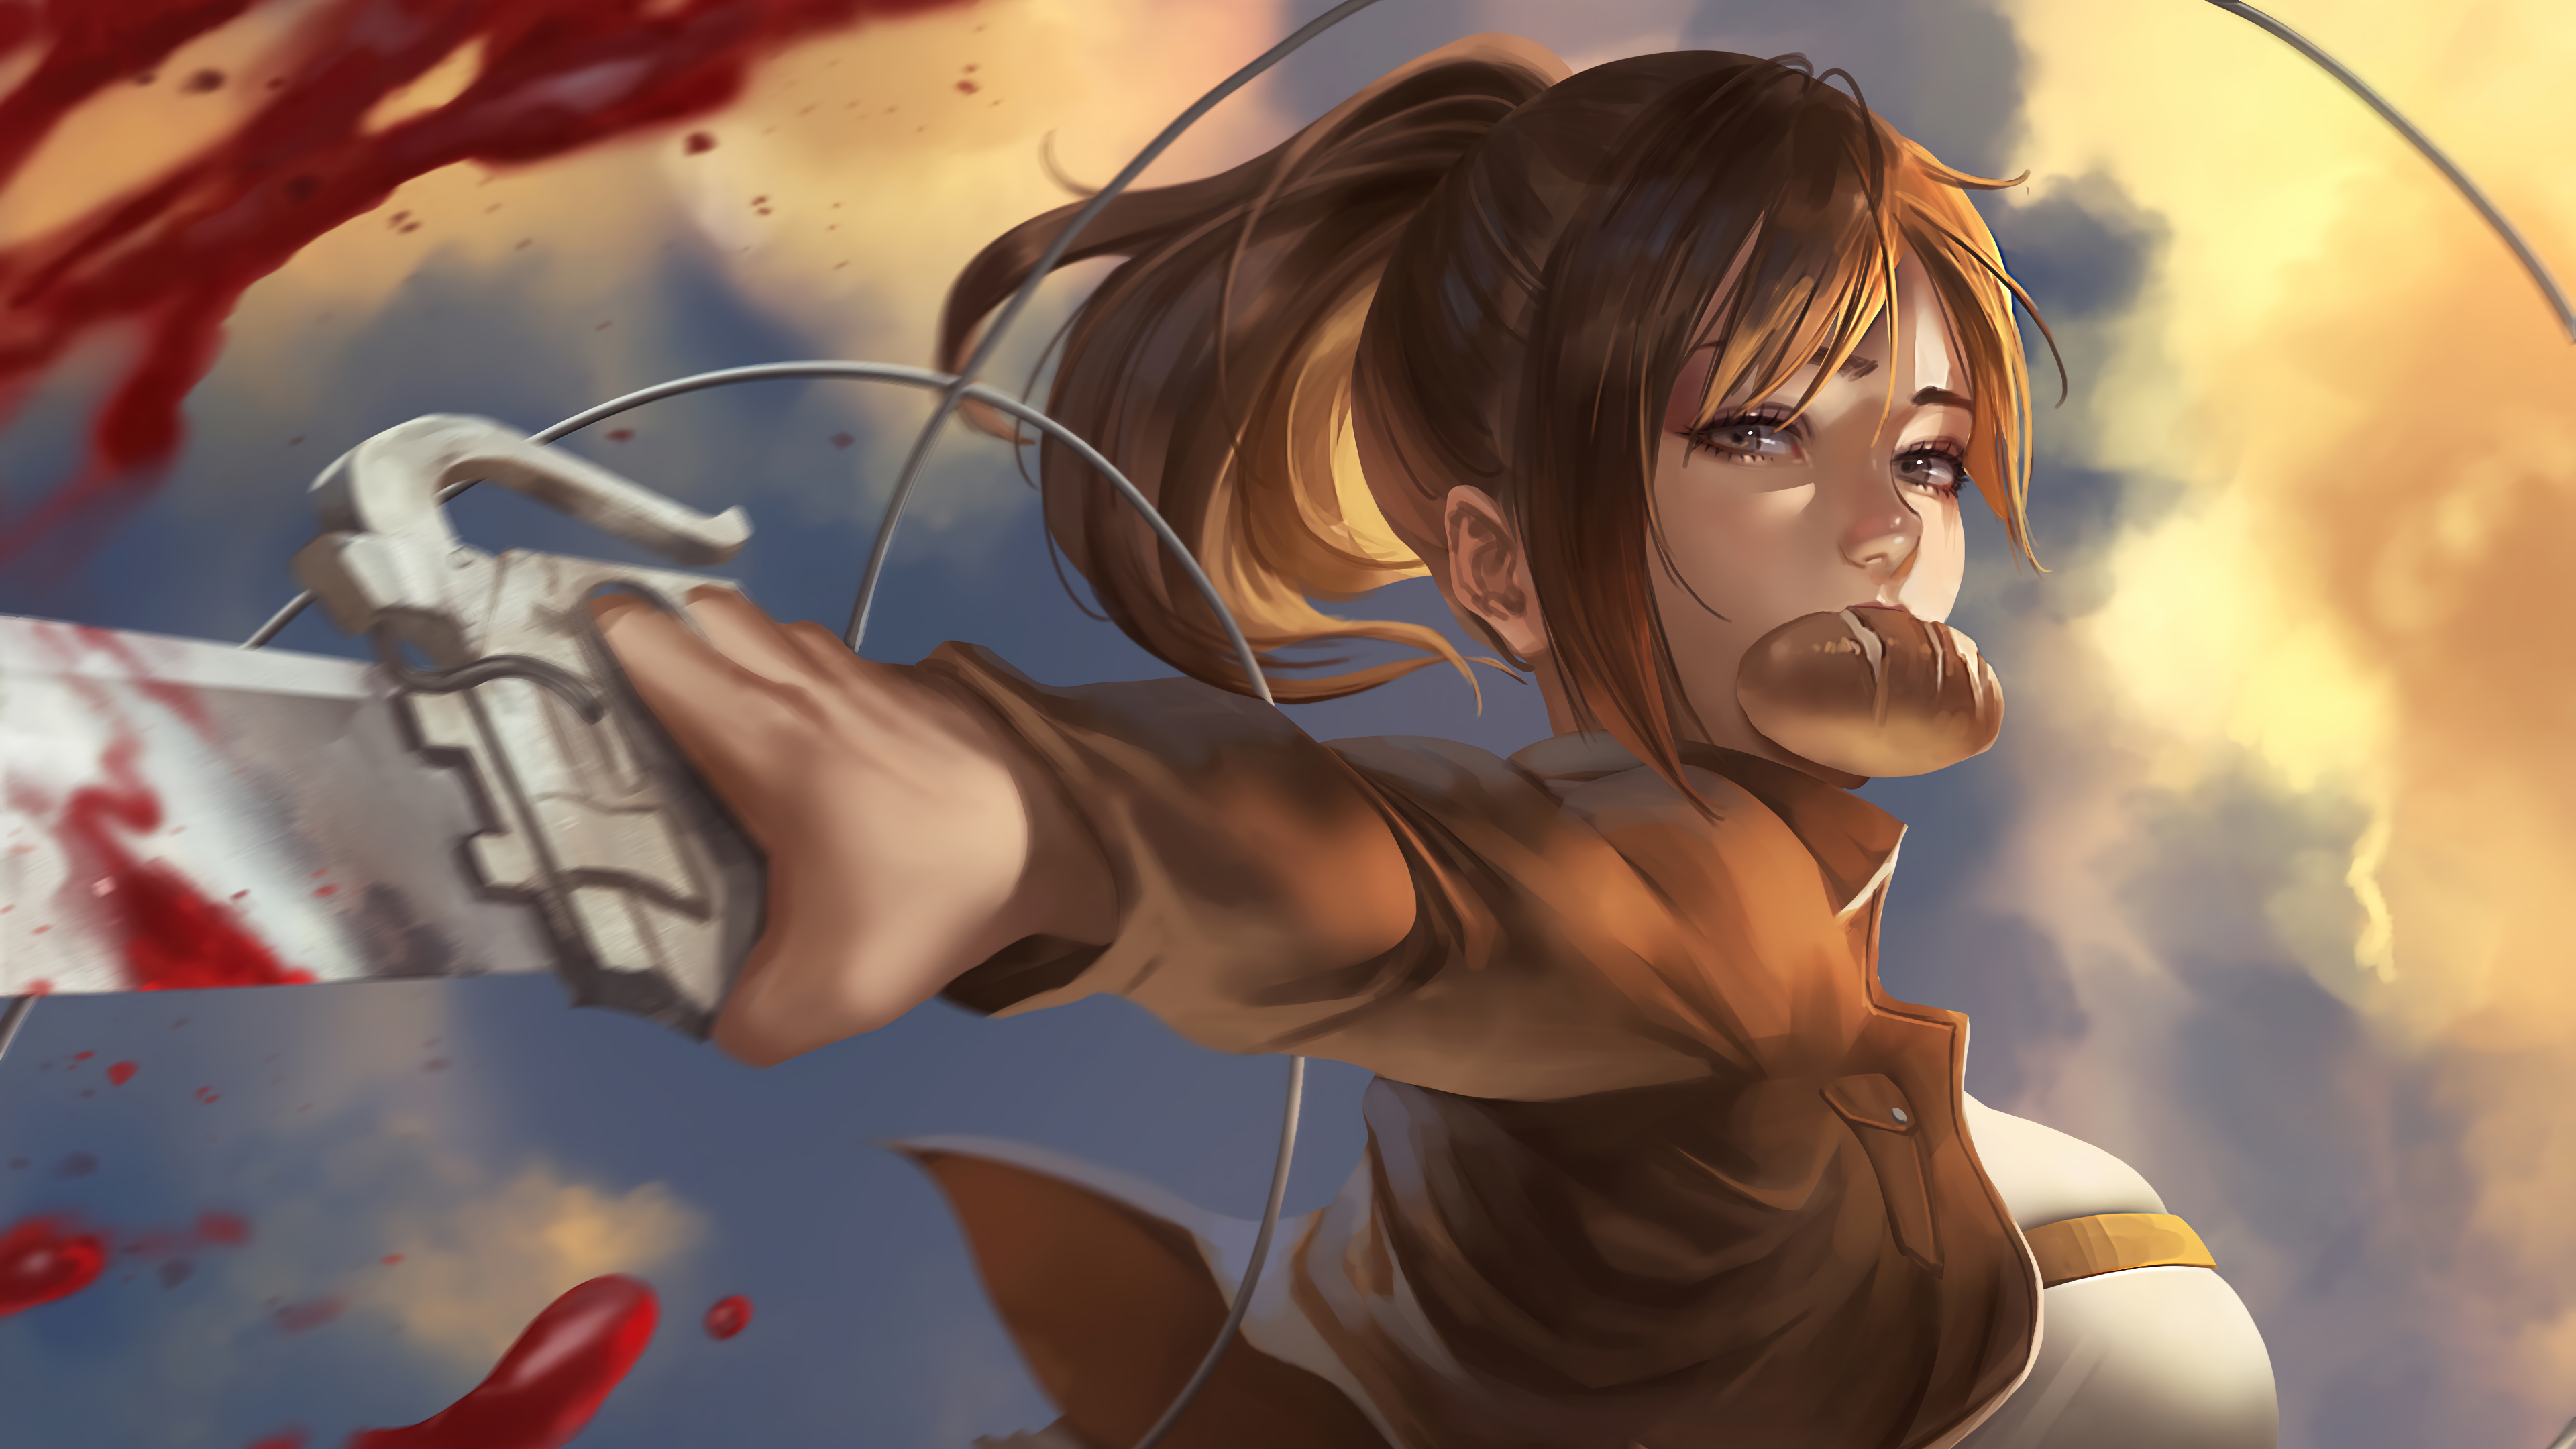 Wp5640993-attack-on-titan-anime-4k-pc-wallpapers by sabu110003 on DeviantArt